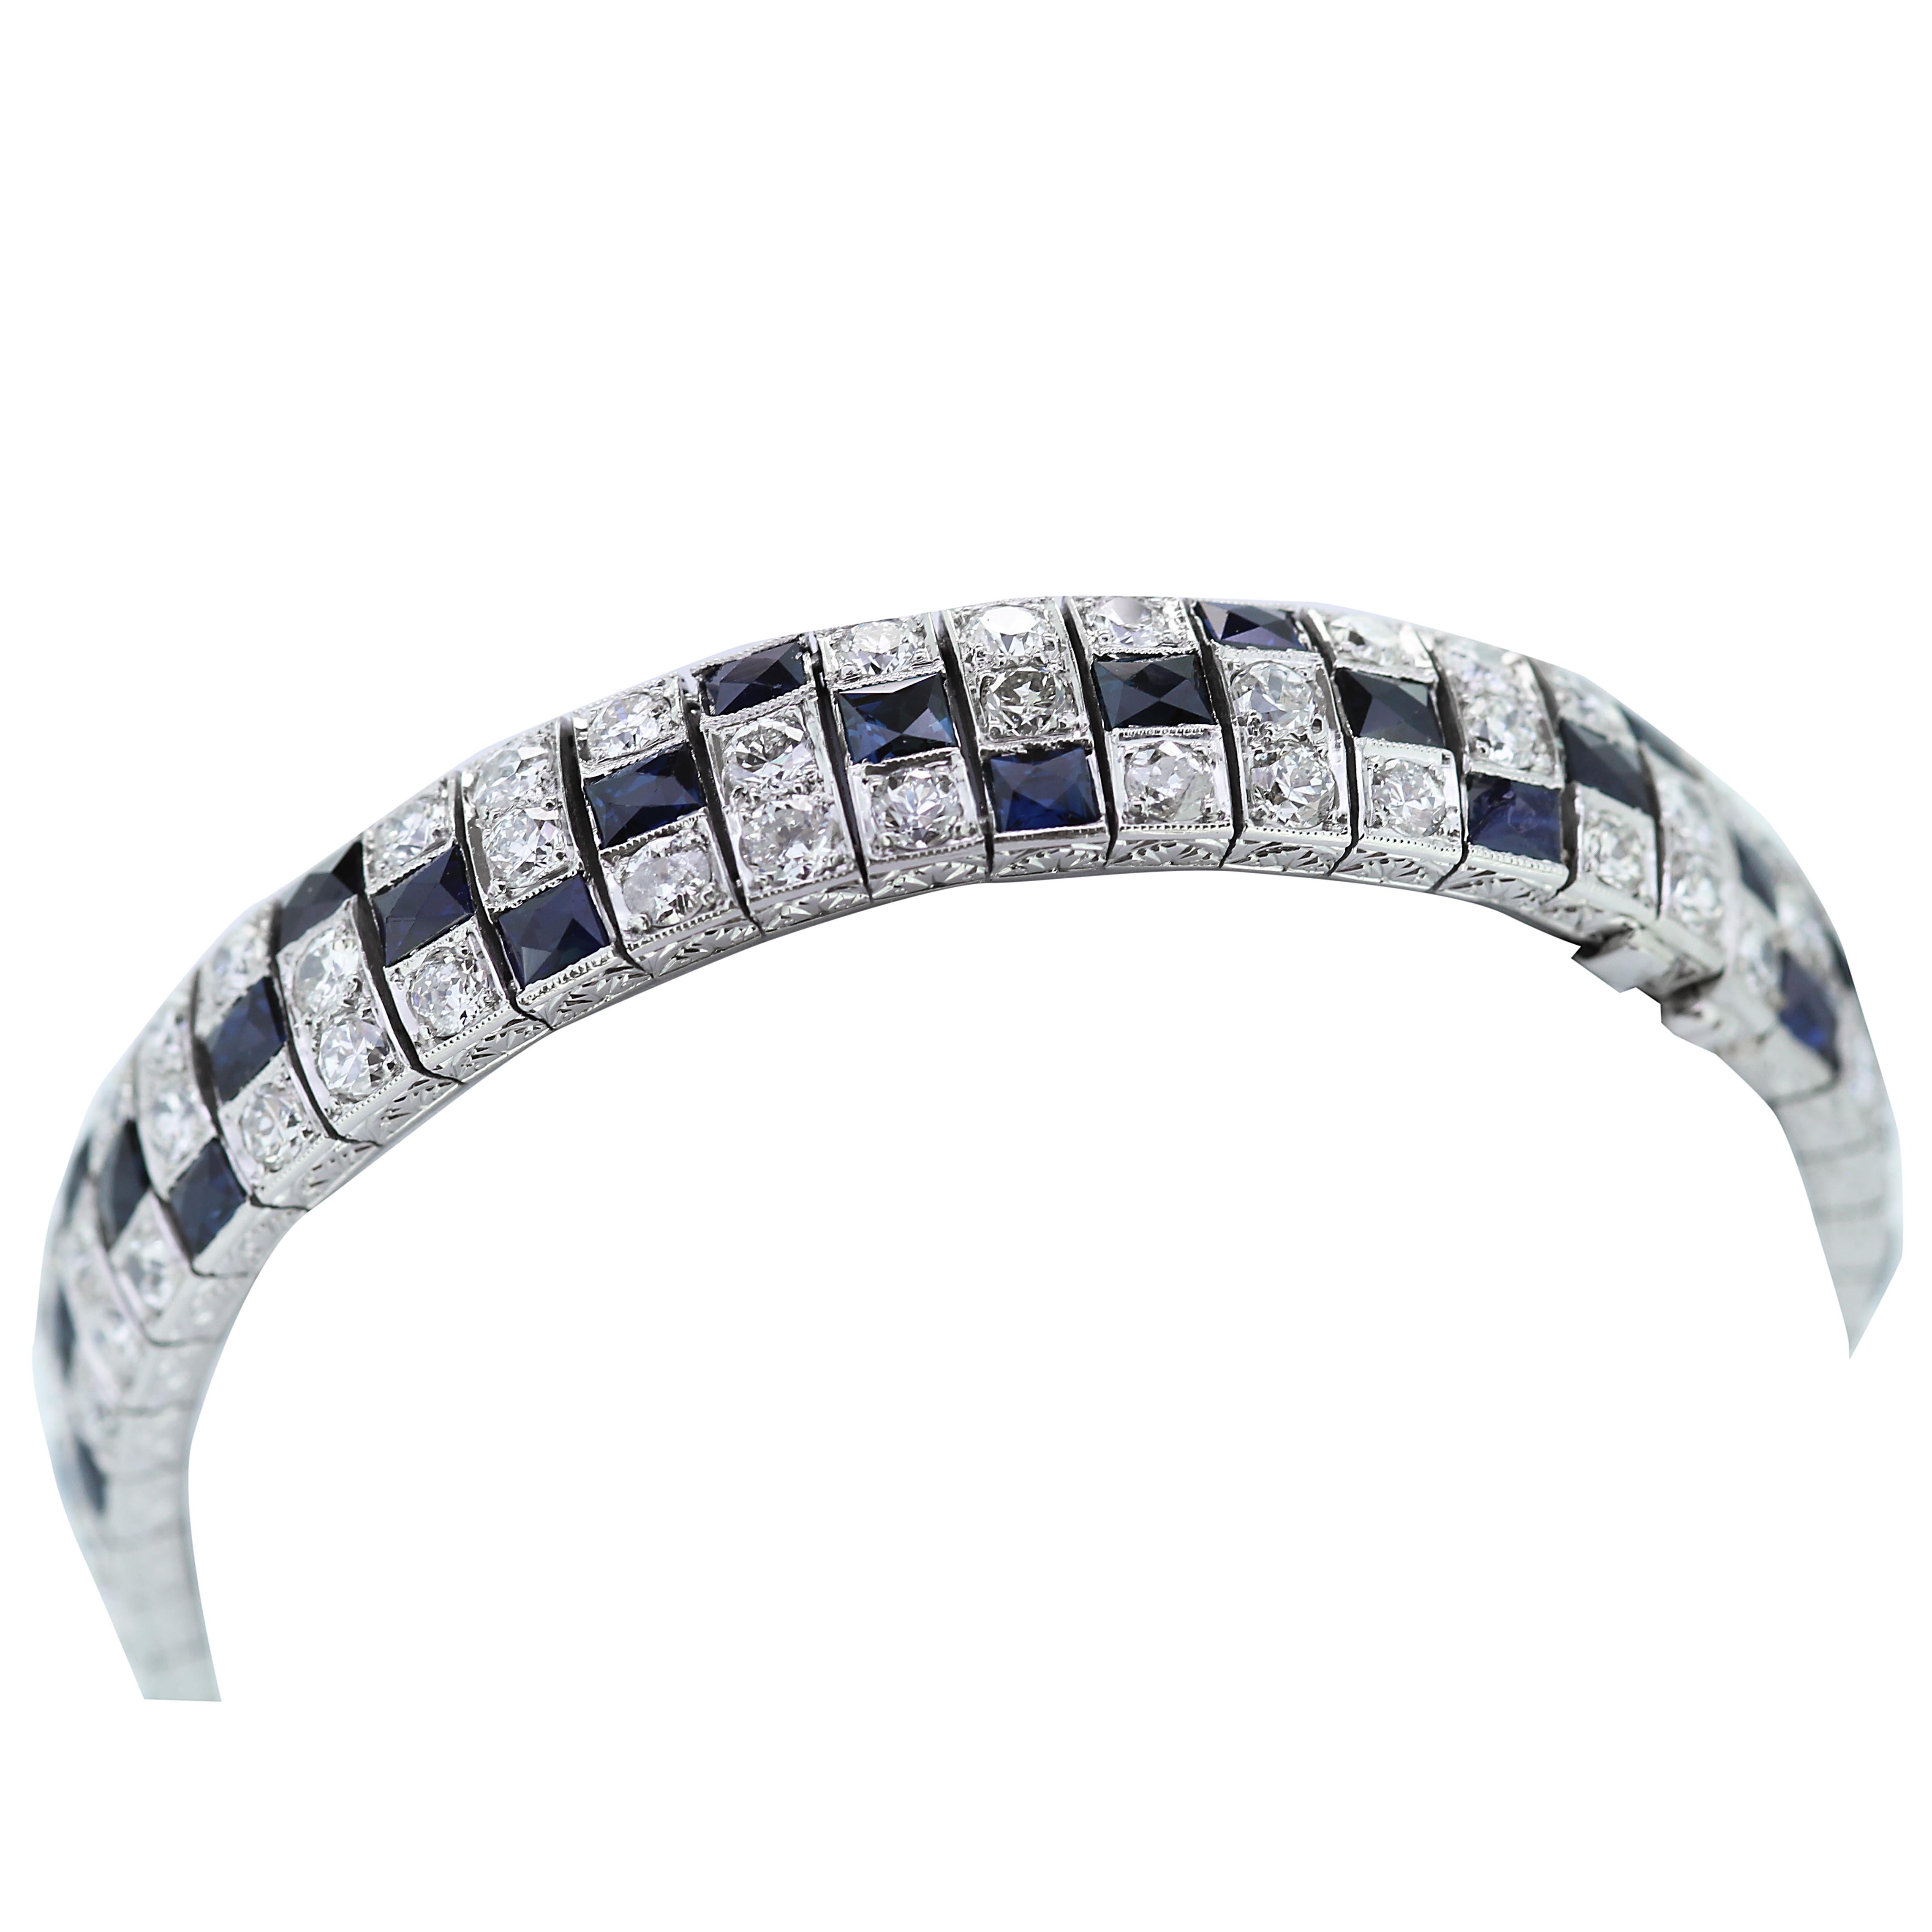 Bright and brilliant 3 rows blue sapphire and diamond bracelet with hidden clasp and beautifully engraved details on the side in platinum.
48 rectangular cut sapphires approximate total weight 8.0 ct
96 Old brilliant cut diamonds approximate total